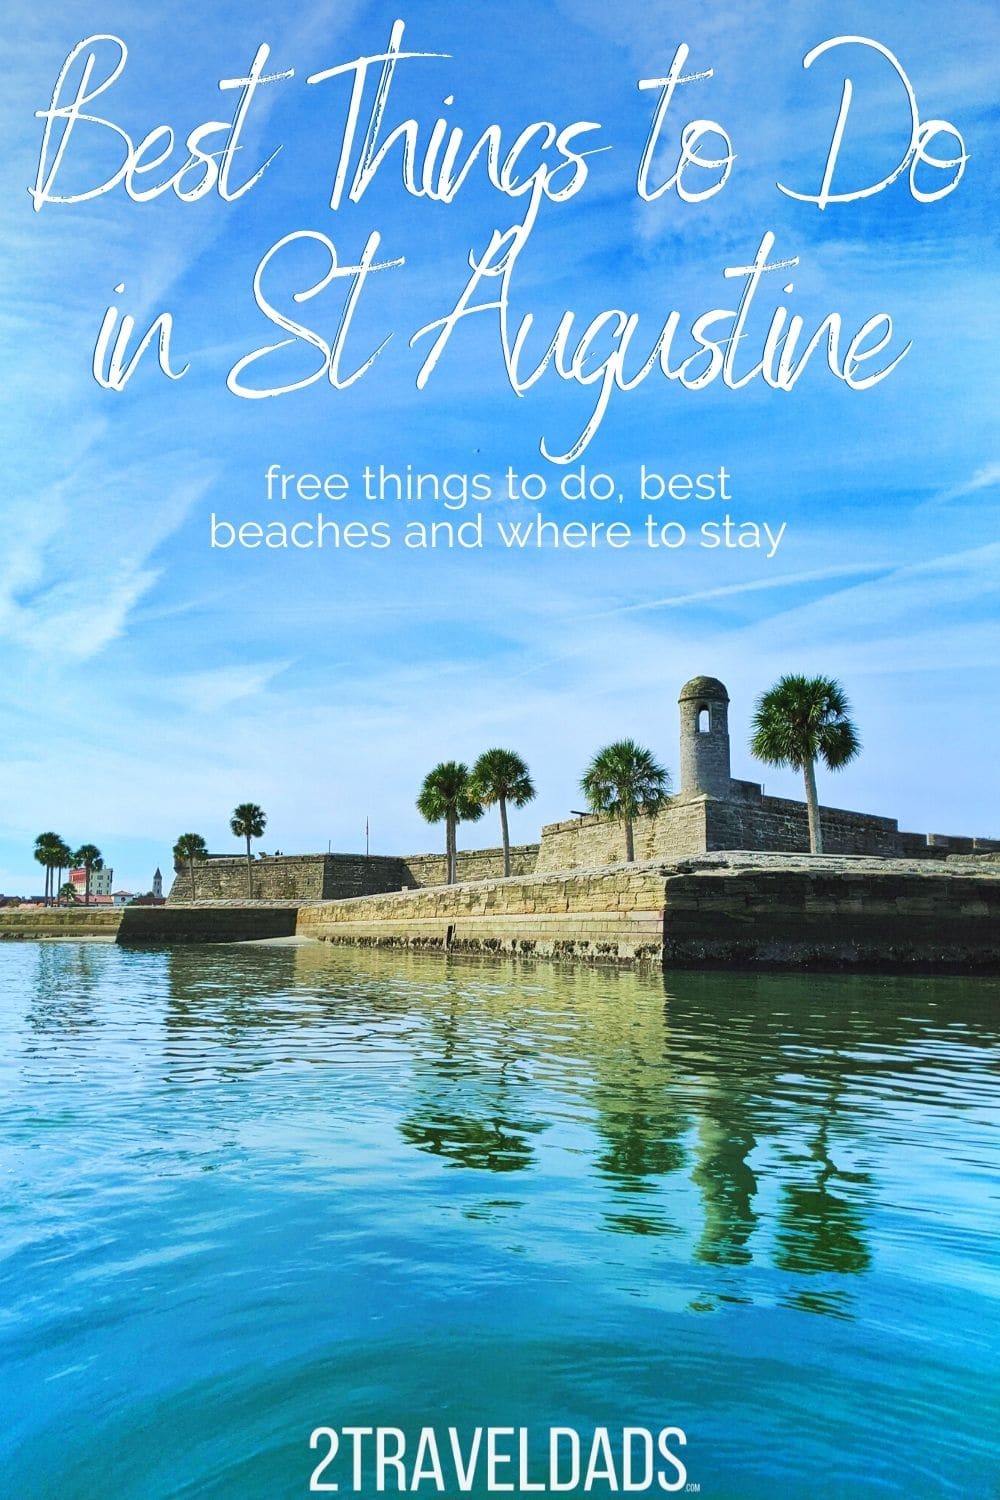 St Augustine has countless things to do, from tours to beaches. The oldest city in the USA, Saint Augustine has a beautiful downtown and amazing food and hotels.